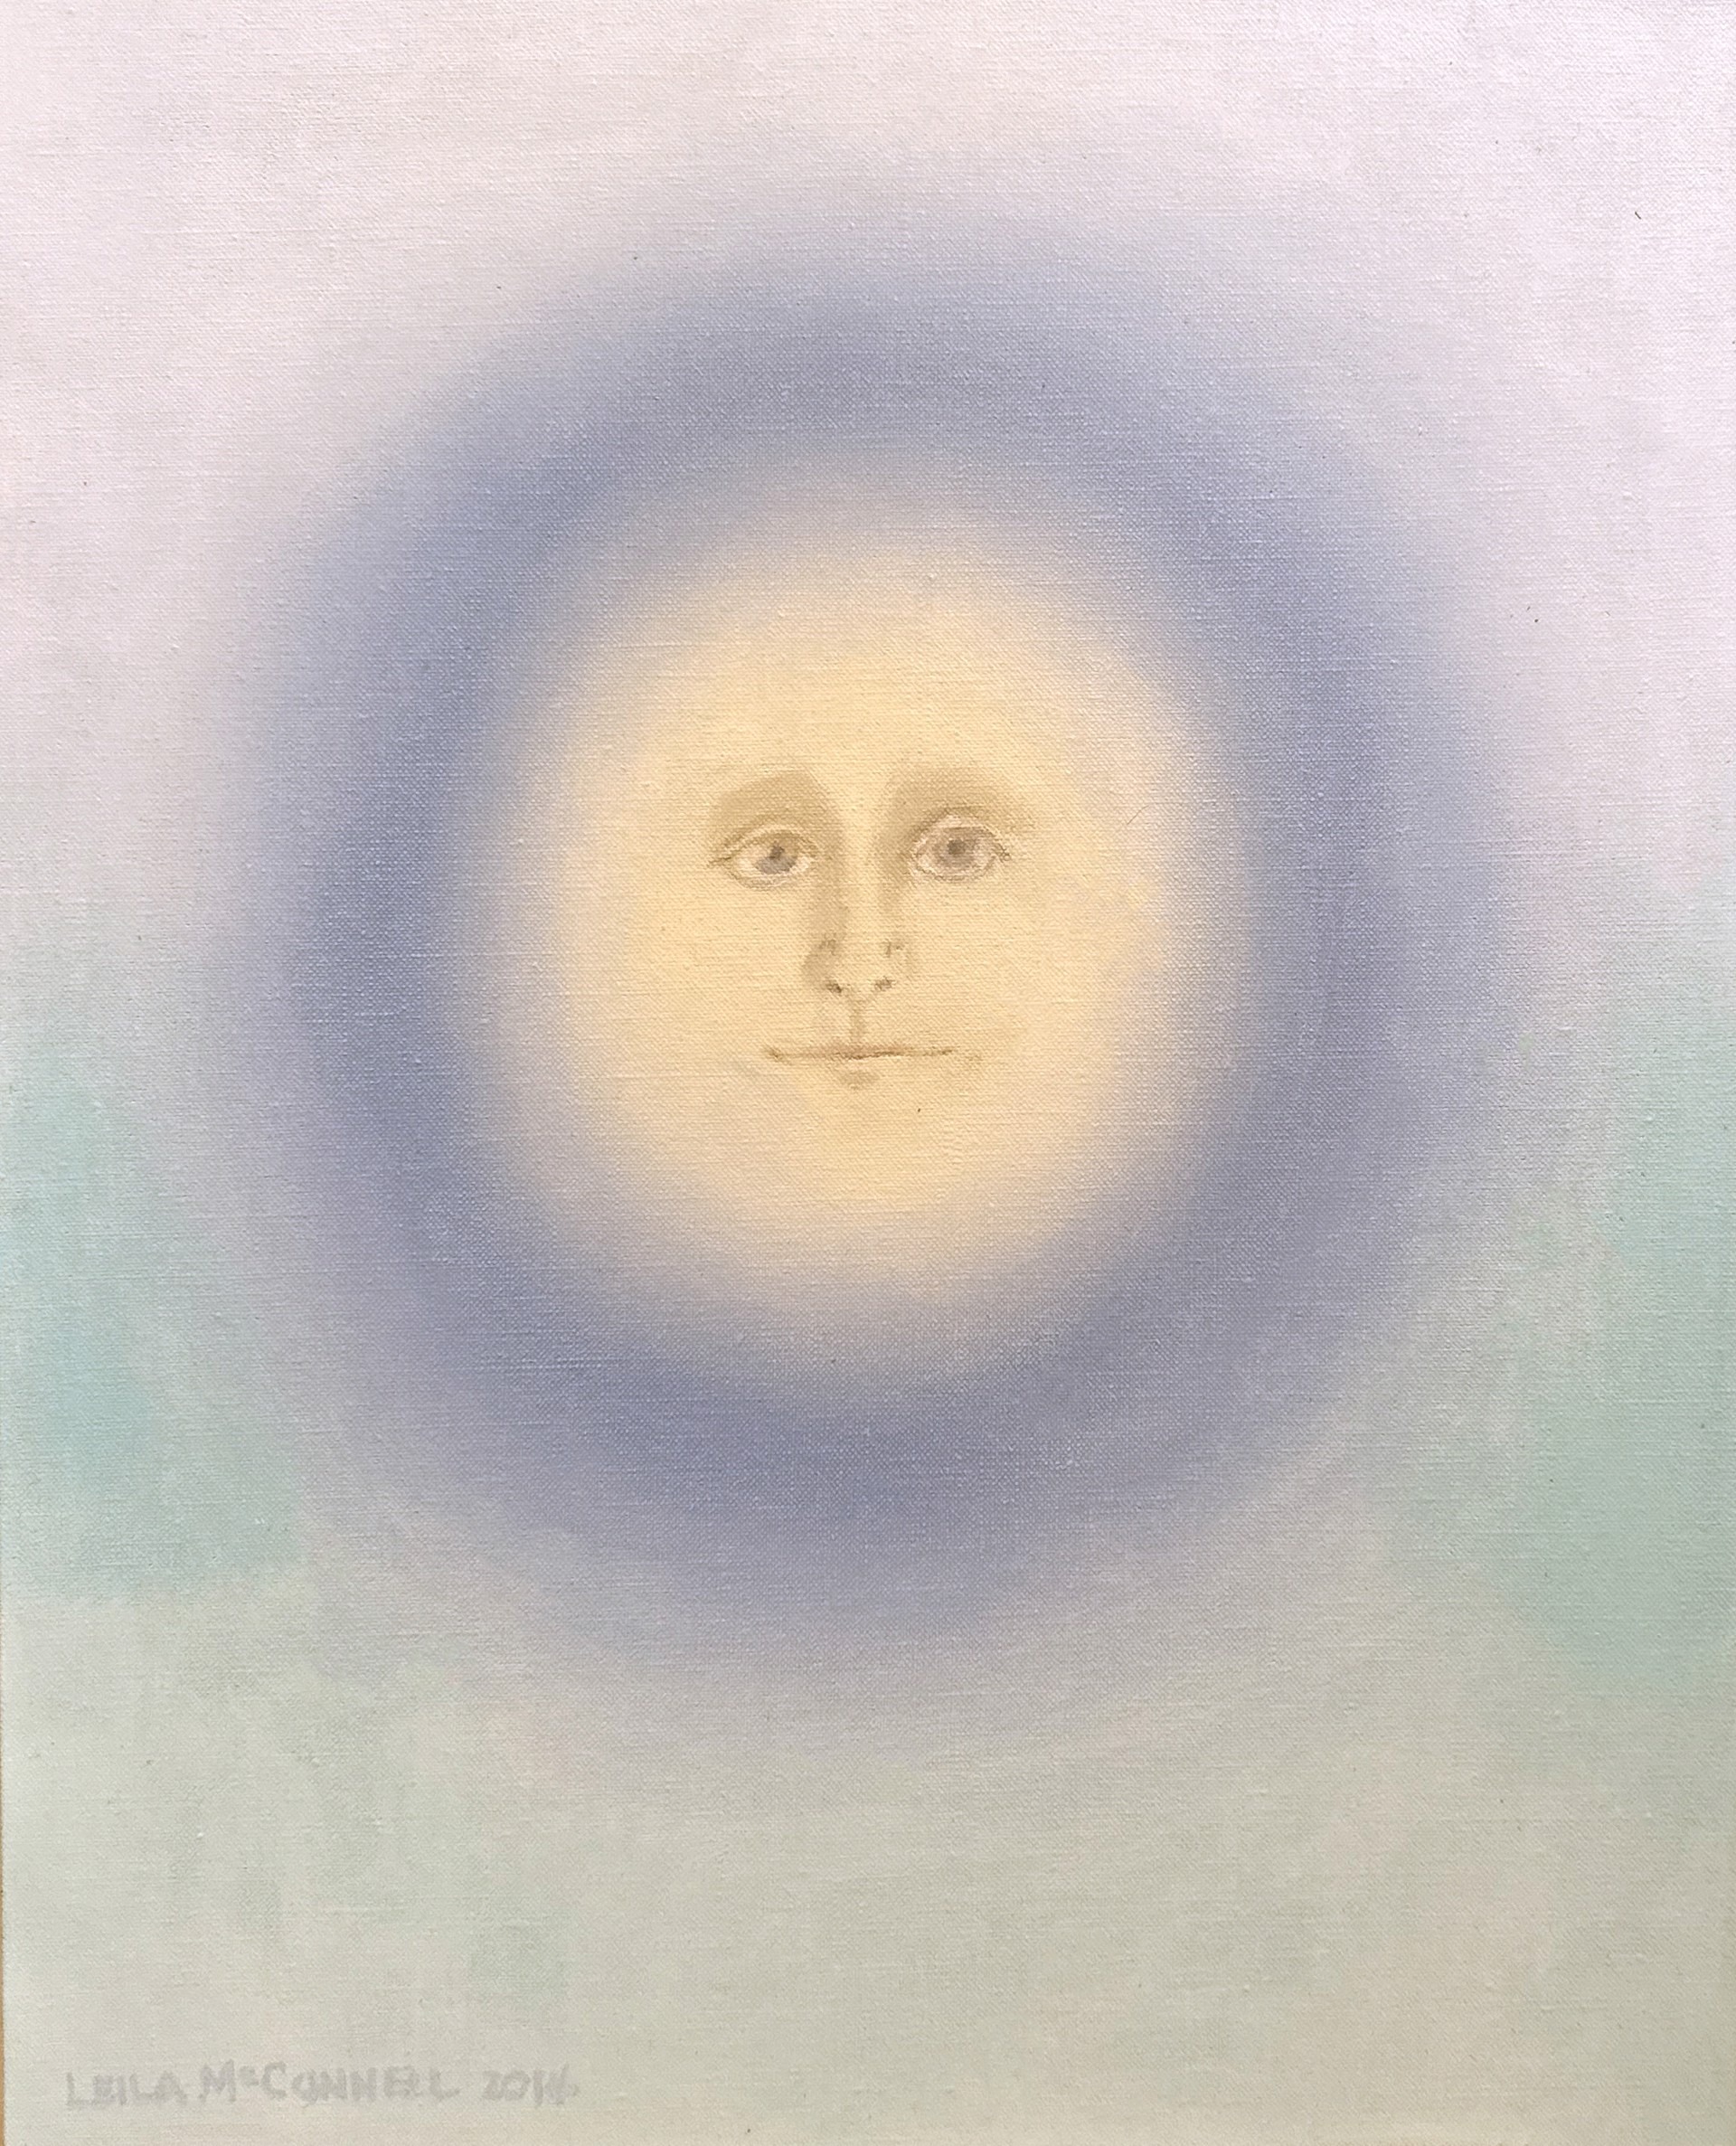 Blue Moon Face by Leila McConnell